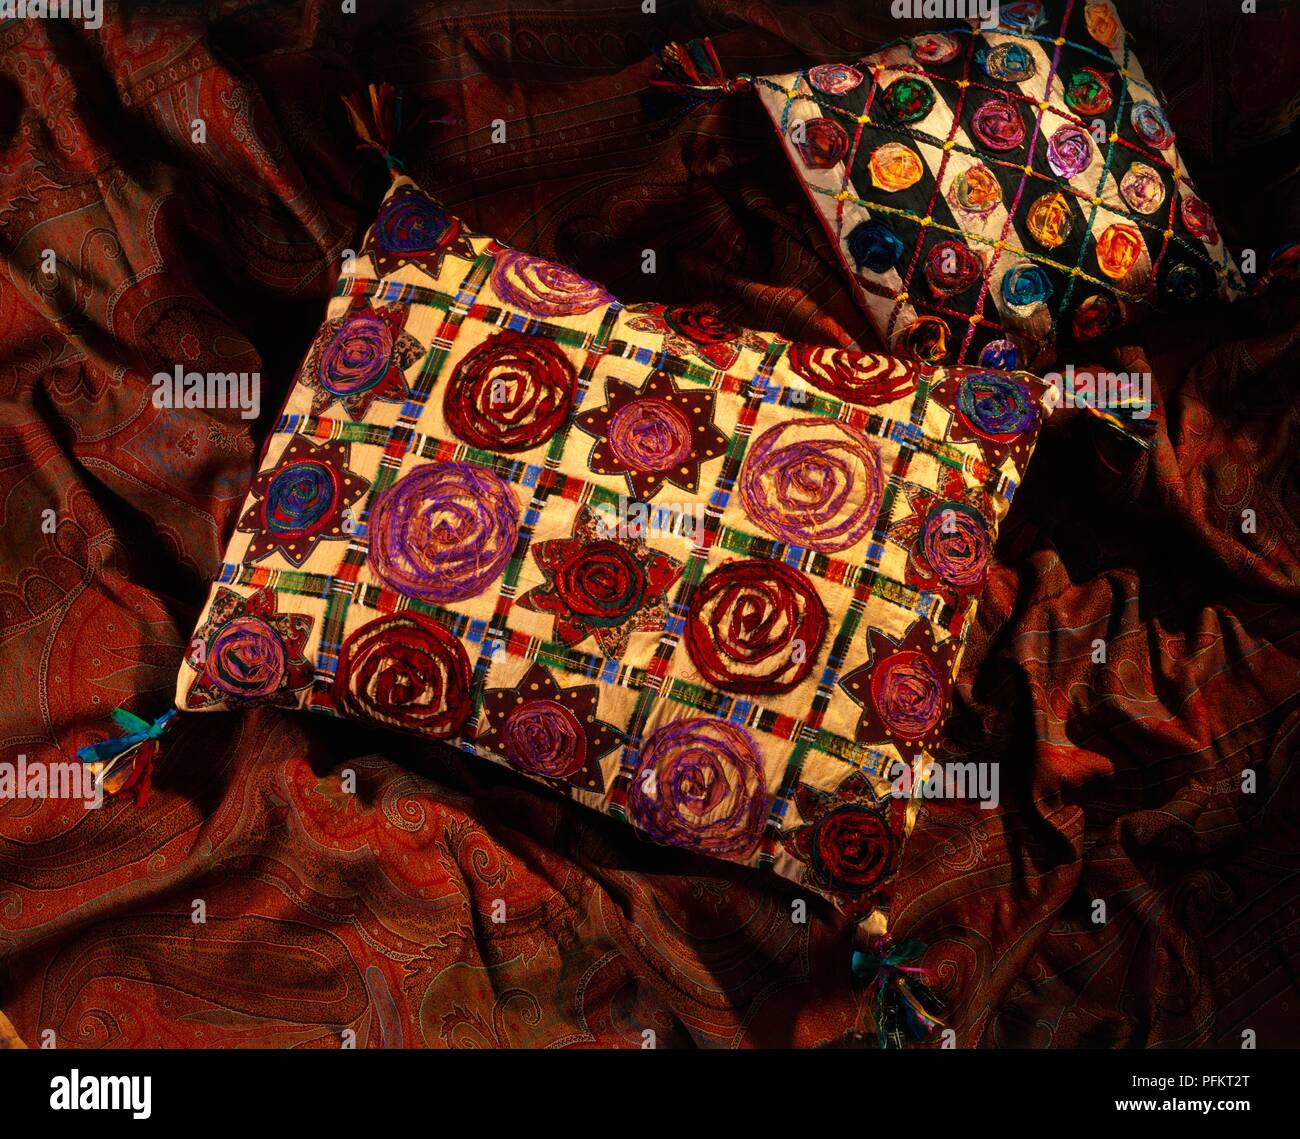 Decorative floral pattern cushions Stock Photo